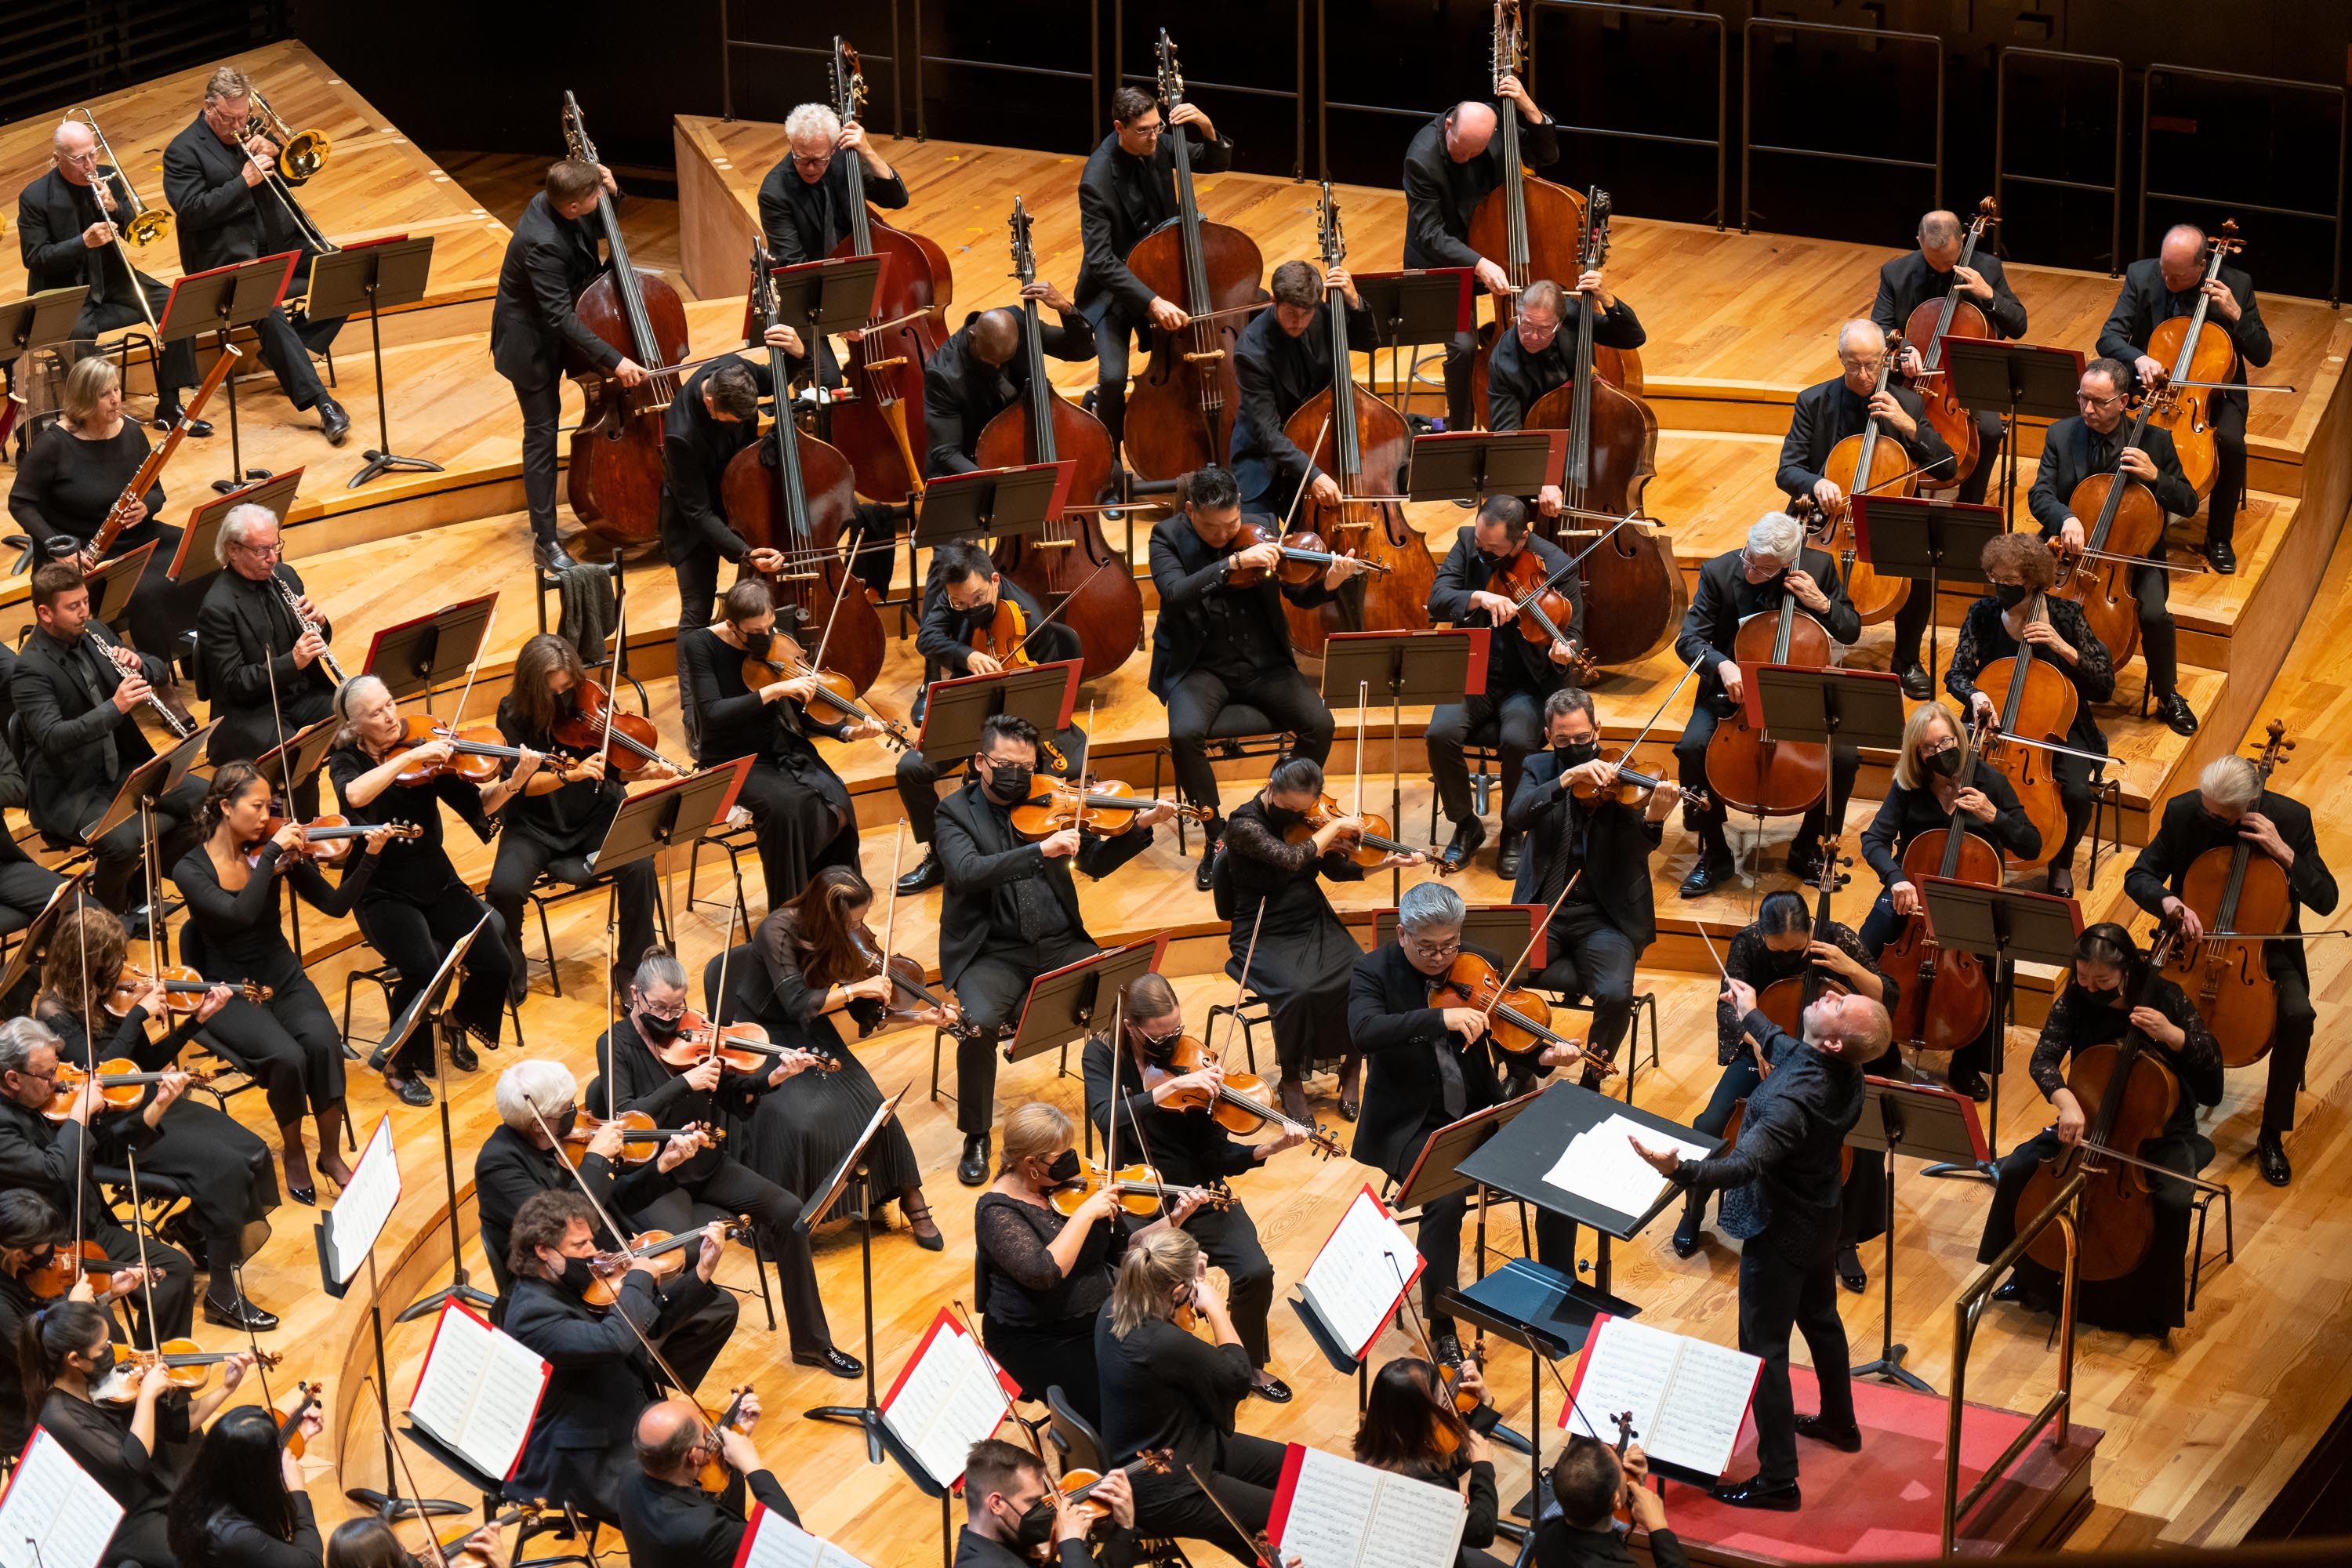 The Orchestra and Yannick perform Dvořák’s Symphony No. 7 in the second half